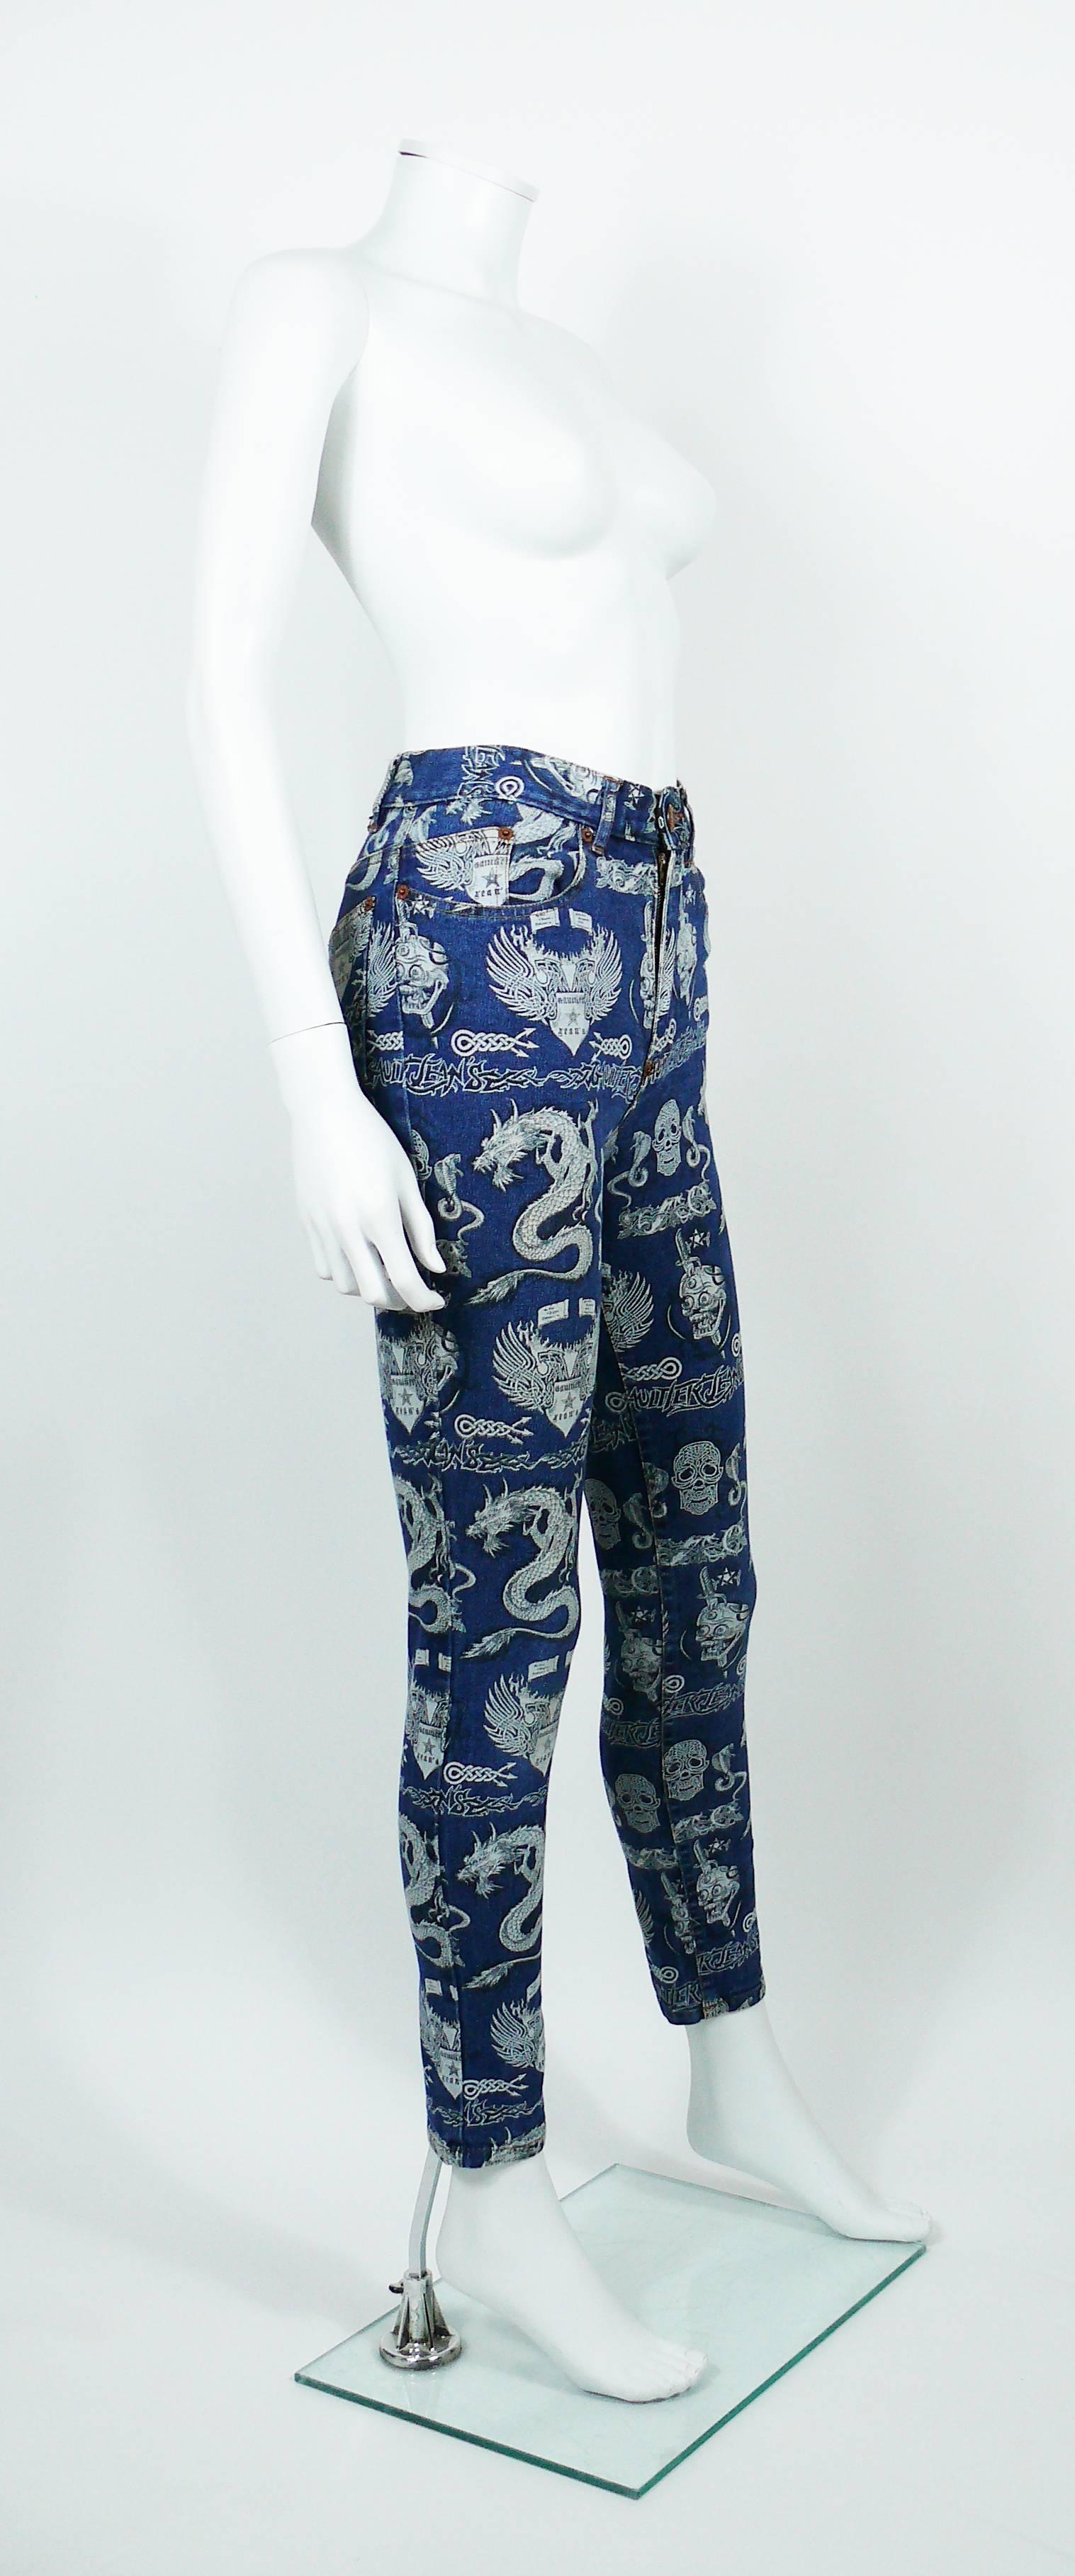 JEAN PAUL GAULTIER vintage high waisted skinny denim pants trousers featuring various tattoo designs : skulls, dragons, cobras, Gaultier Jean's insignas....

These trousers feature :
- Stretchy blue denim jeans featuring white designs throughout.
-